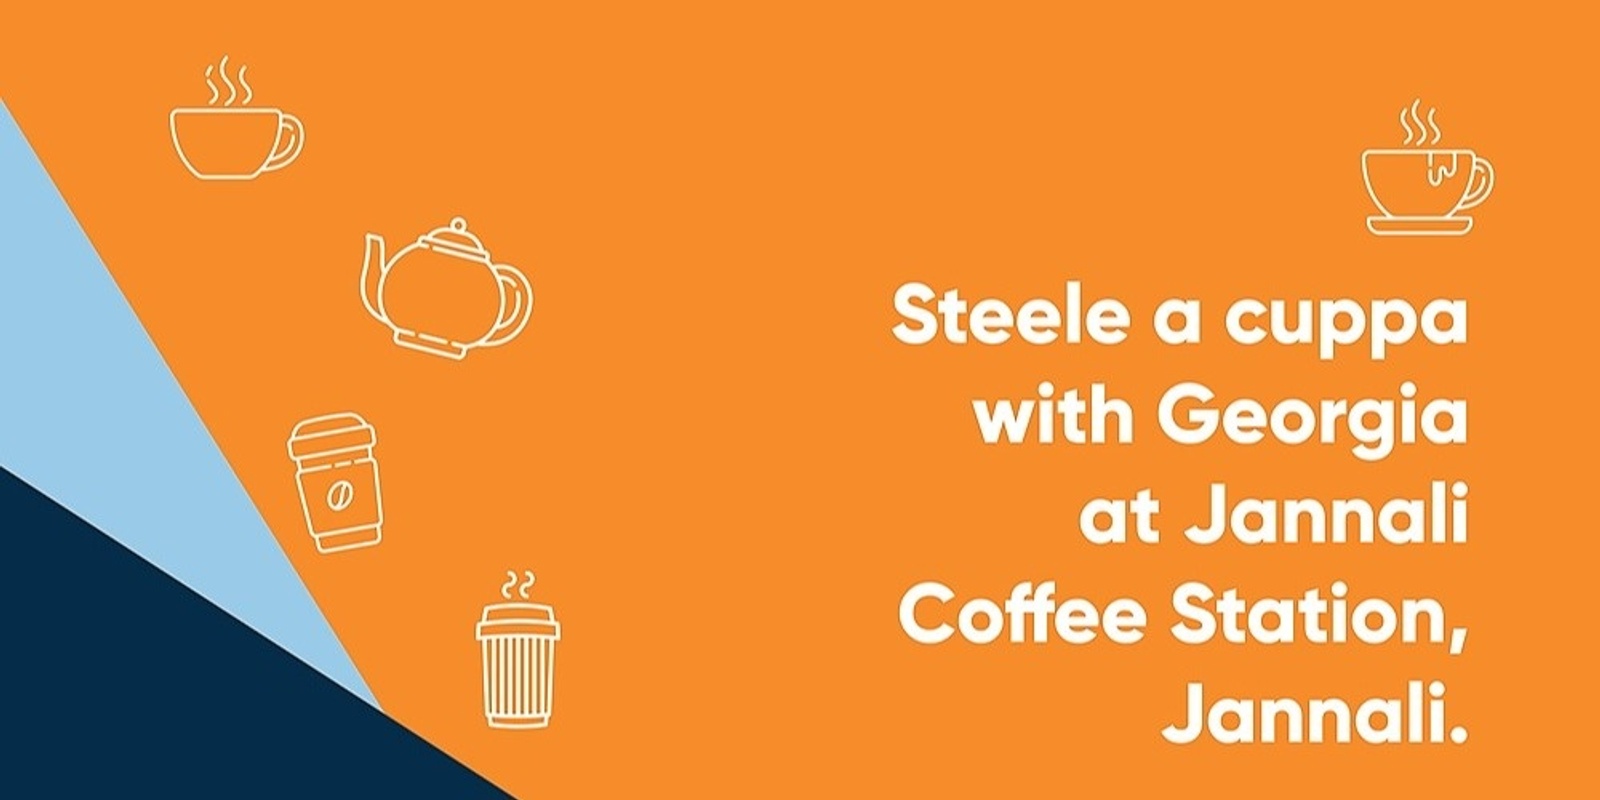 Banner image for Steele a Cuppa with Georgia at Jannali Coffee Station, Jannali